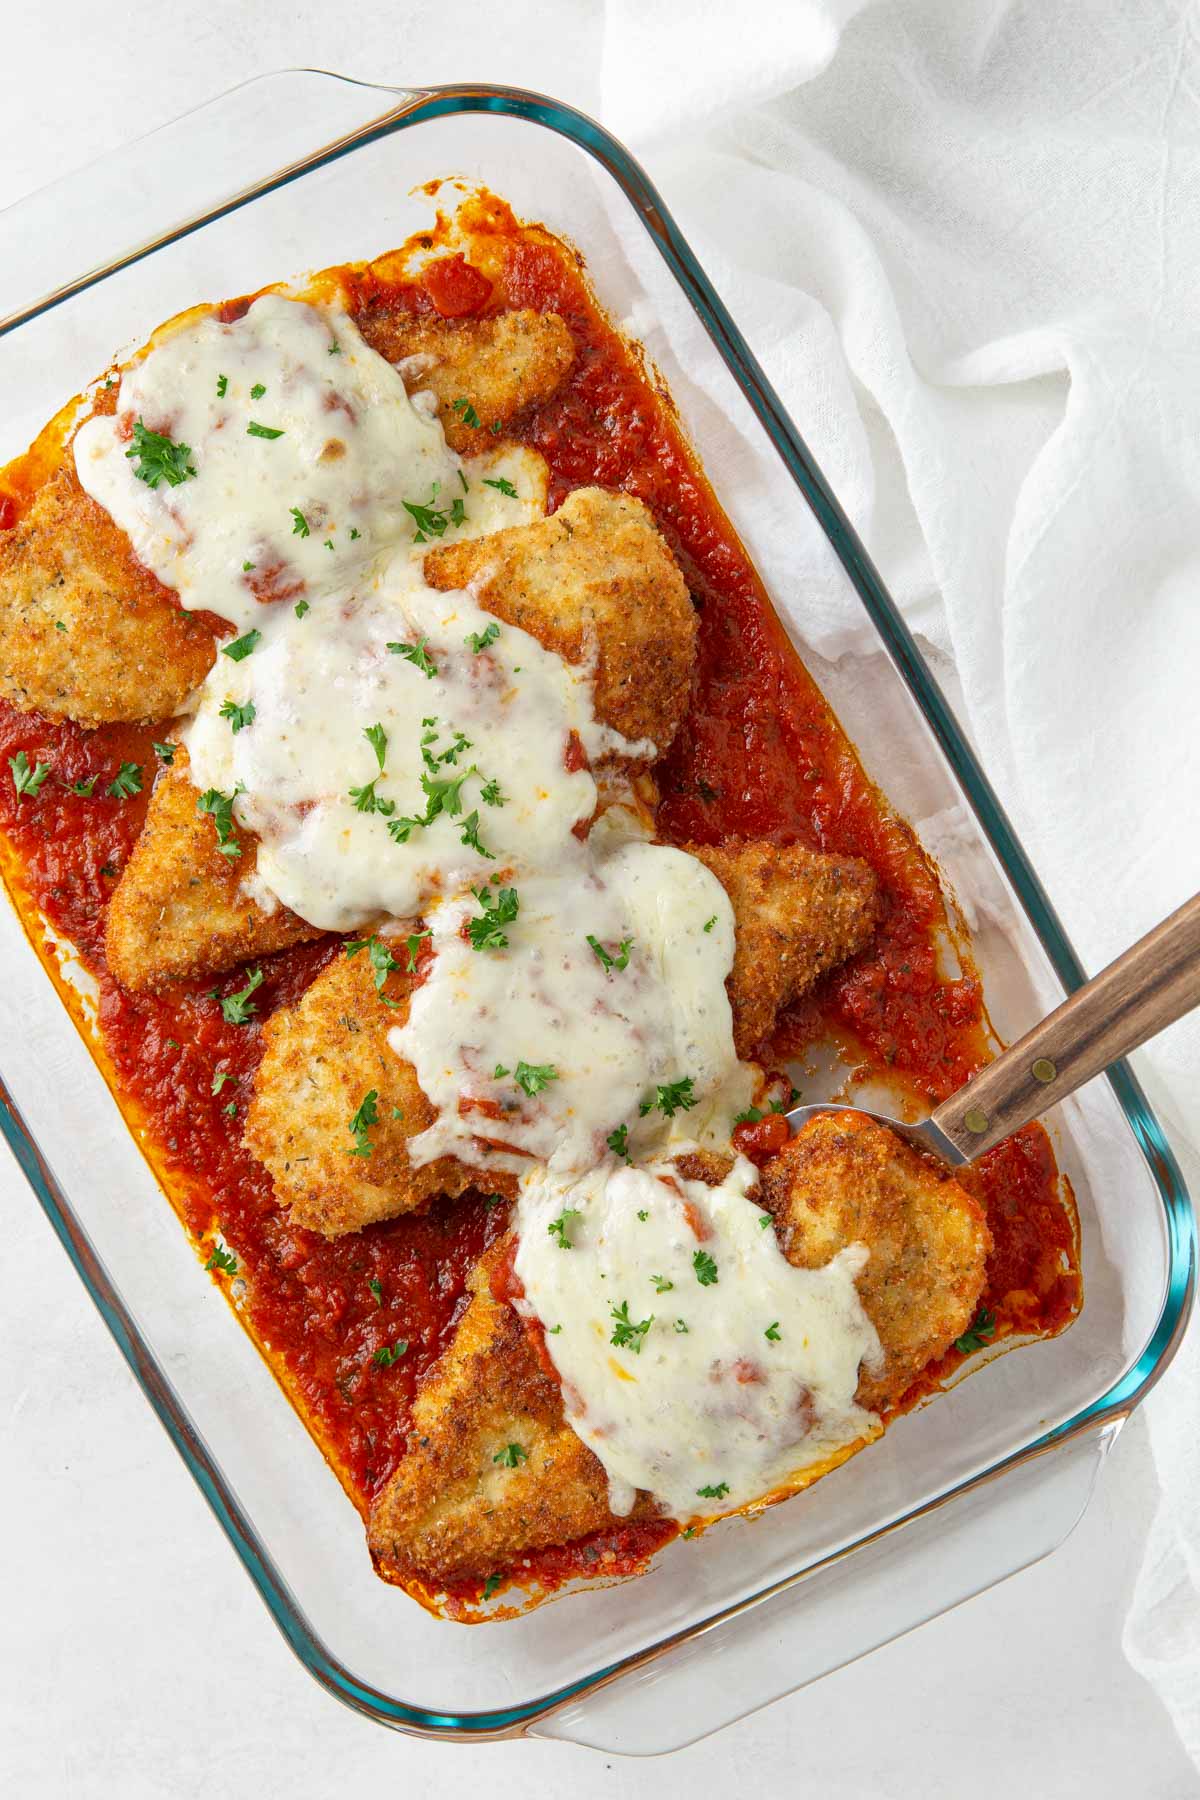 Overhead view of chicken parmesan in a glass baking dish with a server.